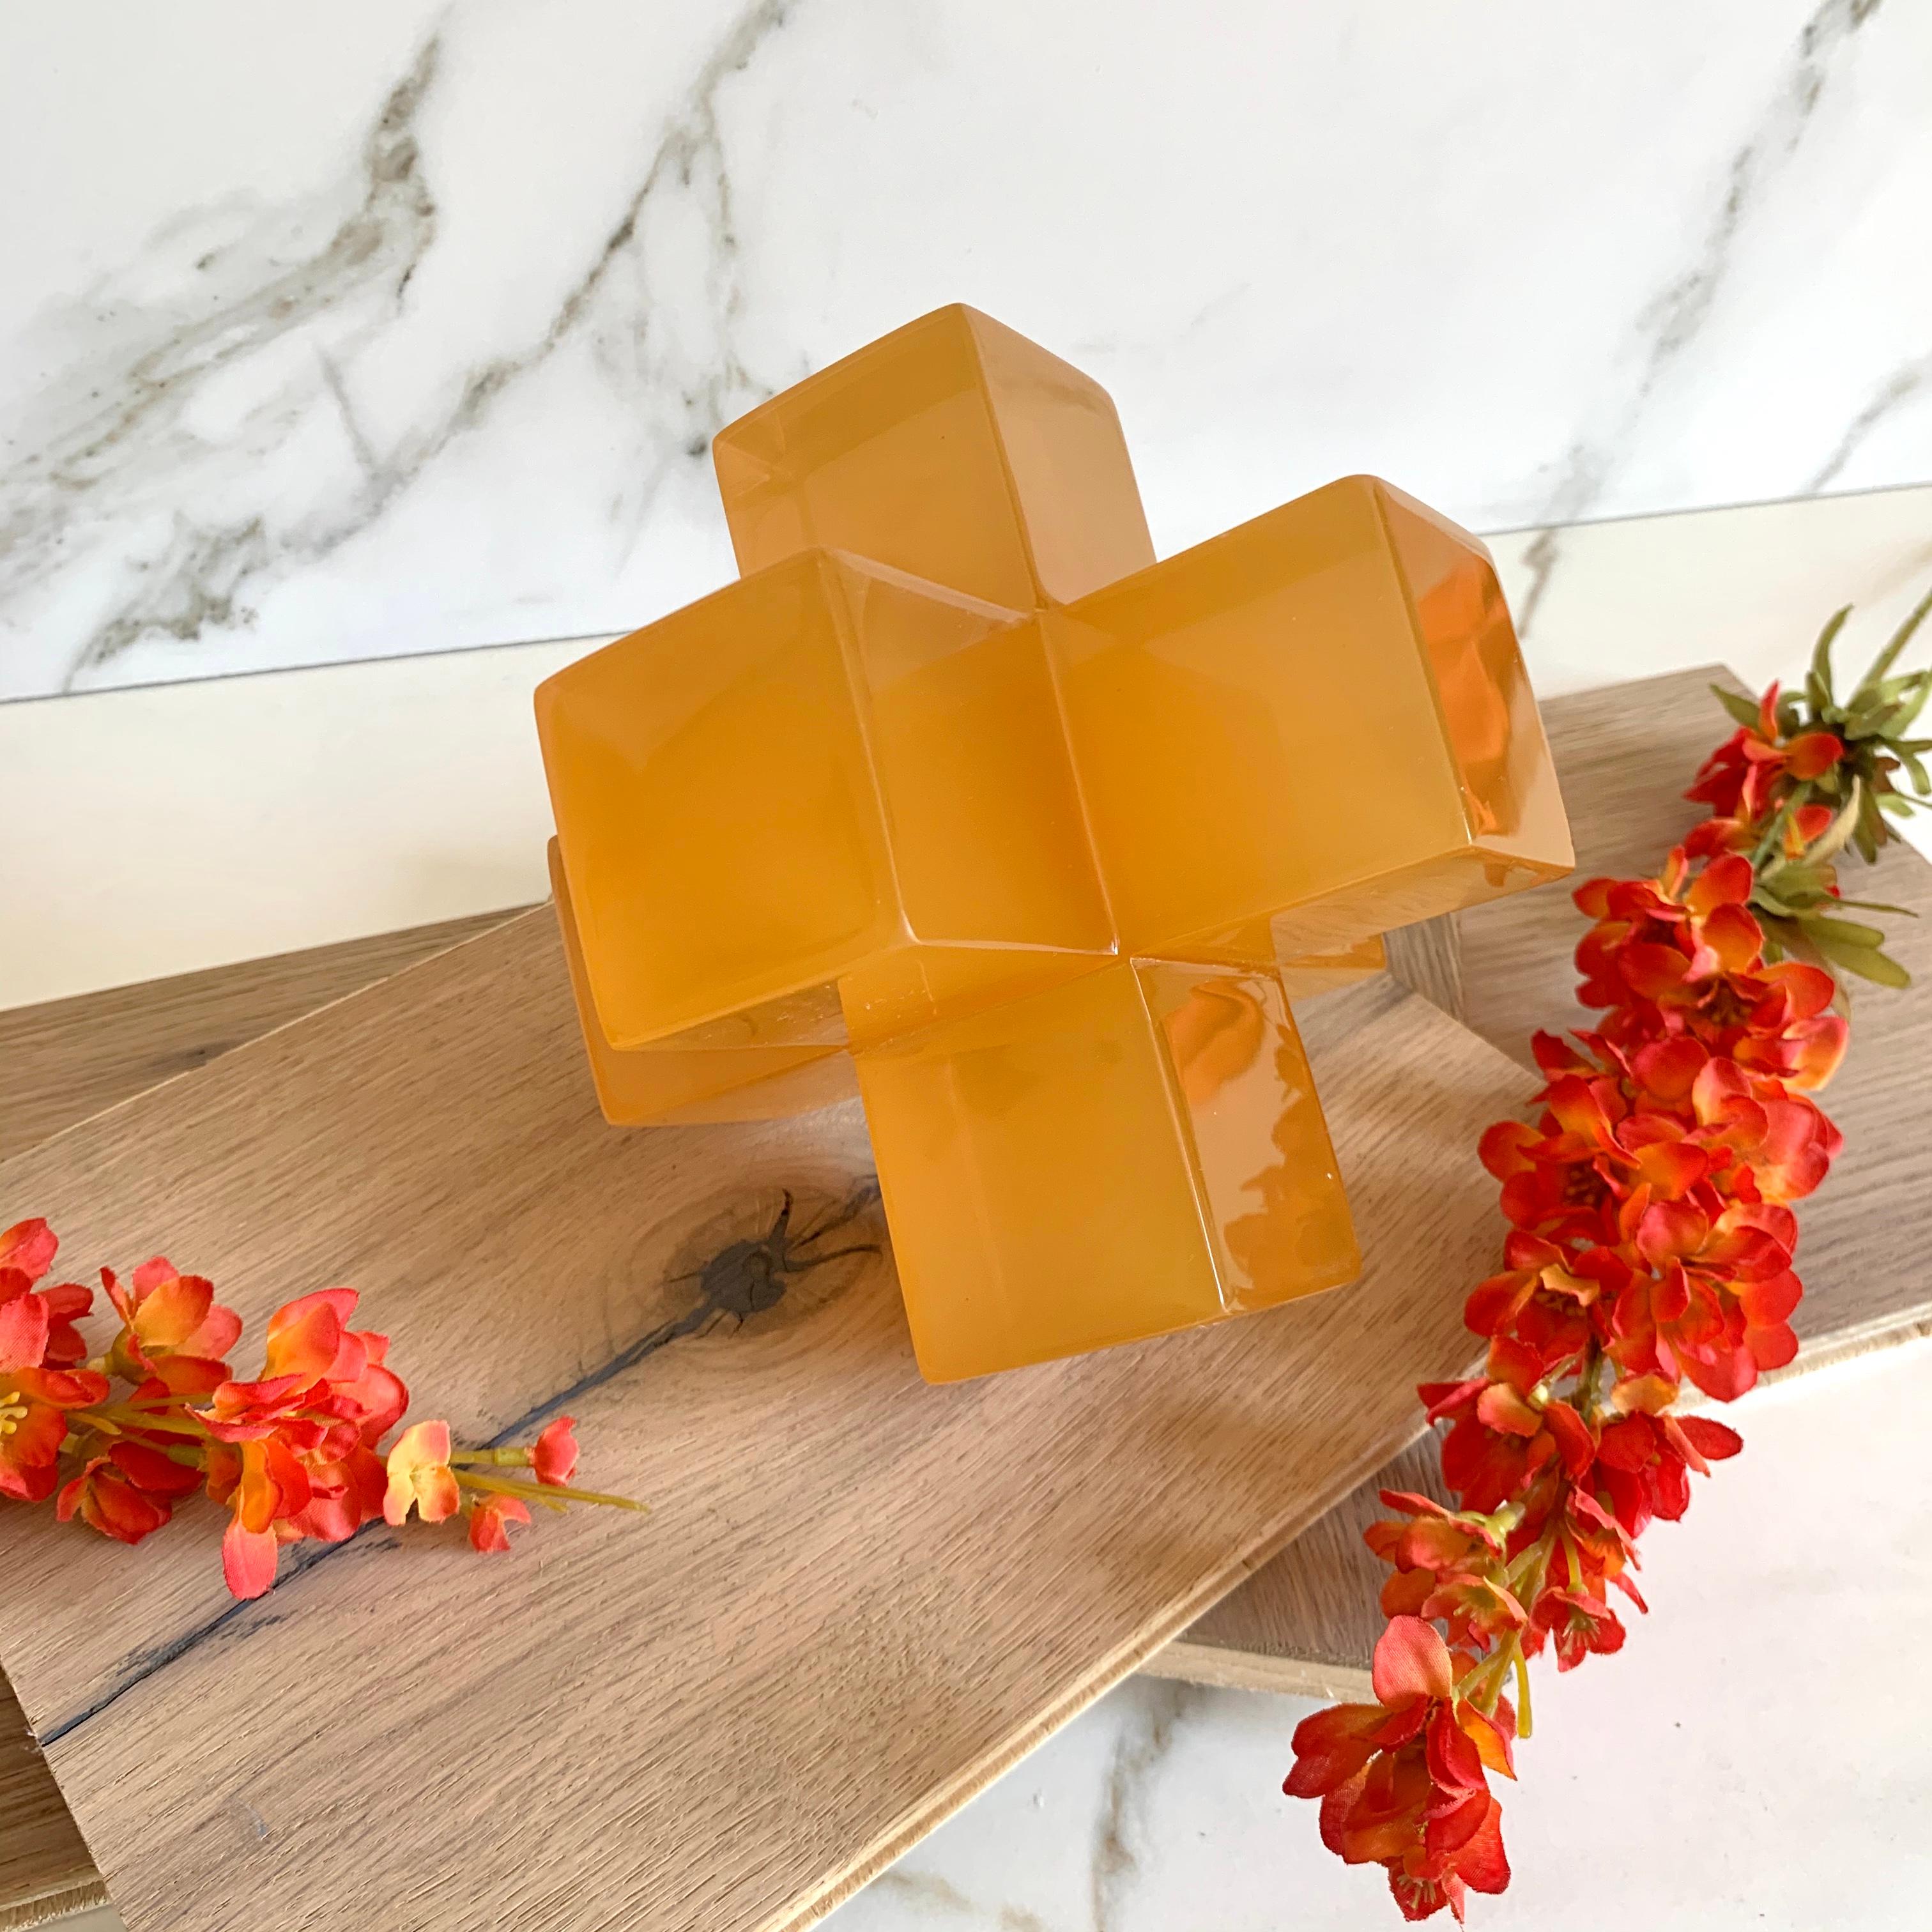 Geometric sculpture made in polished resin in variety of colors. It is a modern and colorful piece that will liven up any space.

This sculpture is very versatile and fun! You can create a different sculpture just by stacking up to three pieces.We